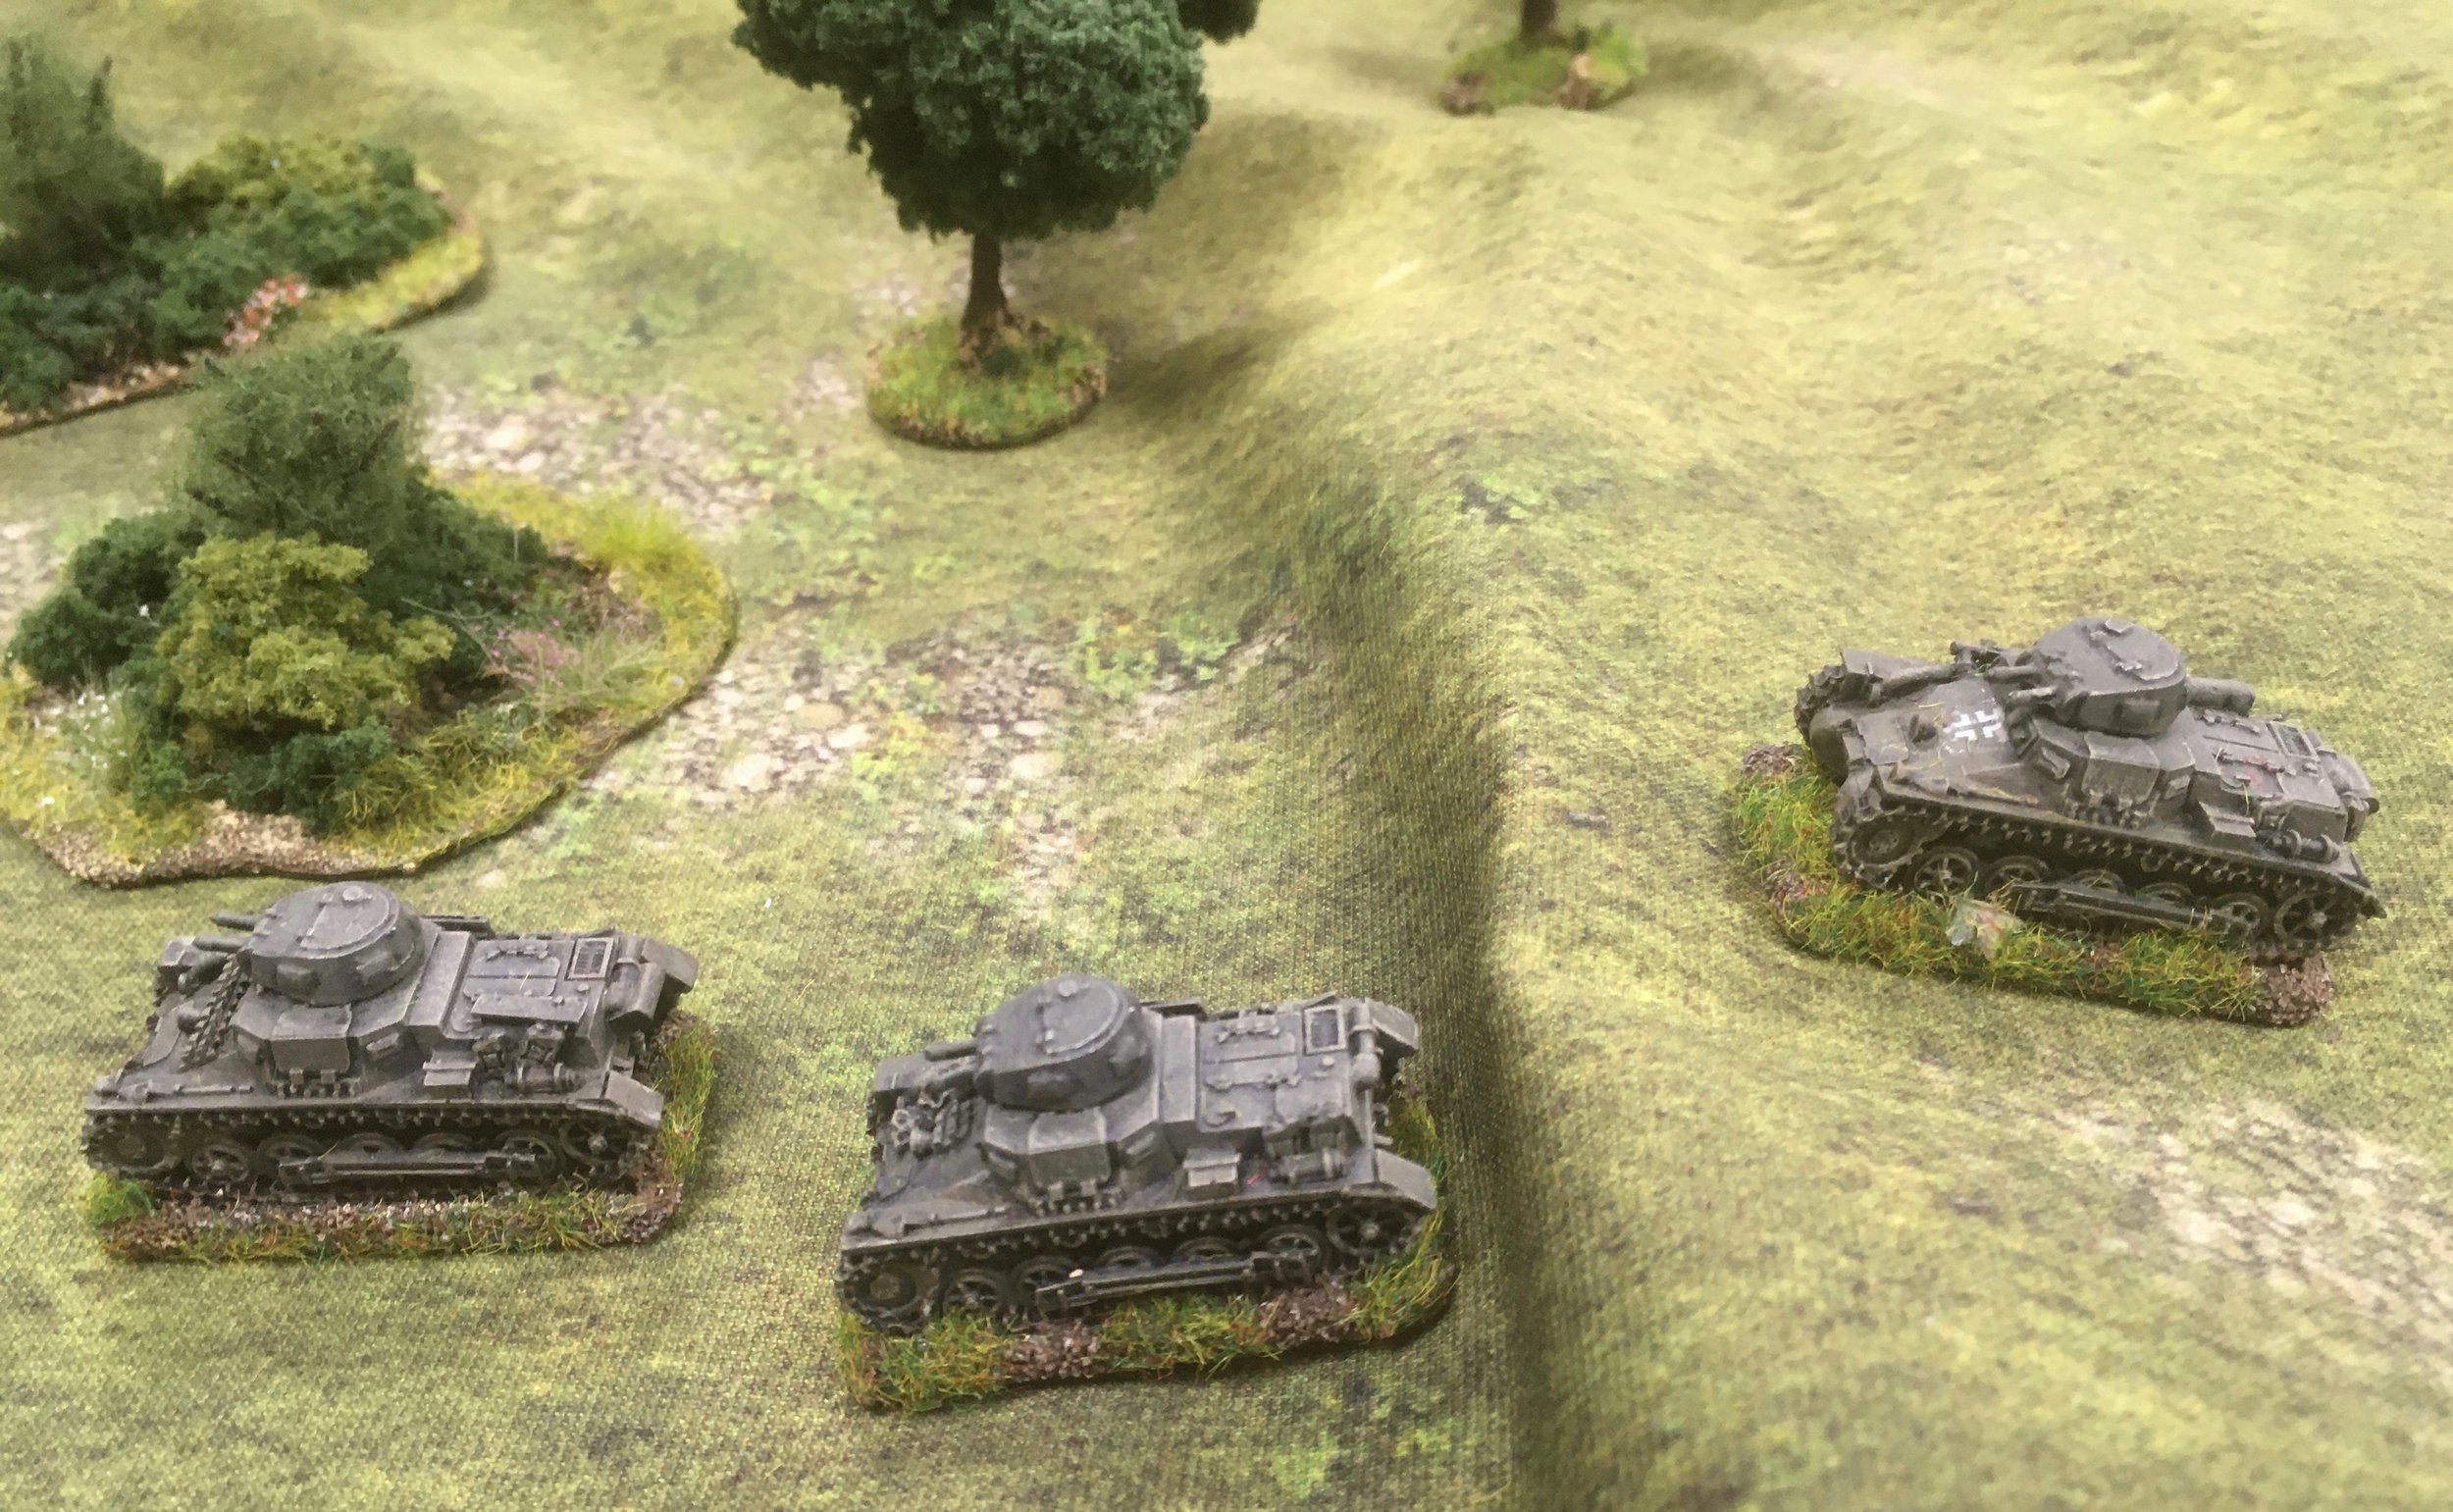 The Panzer I platoon decides to scout around the woods...